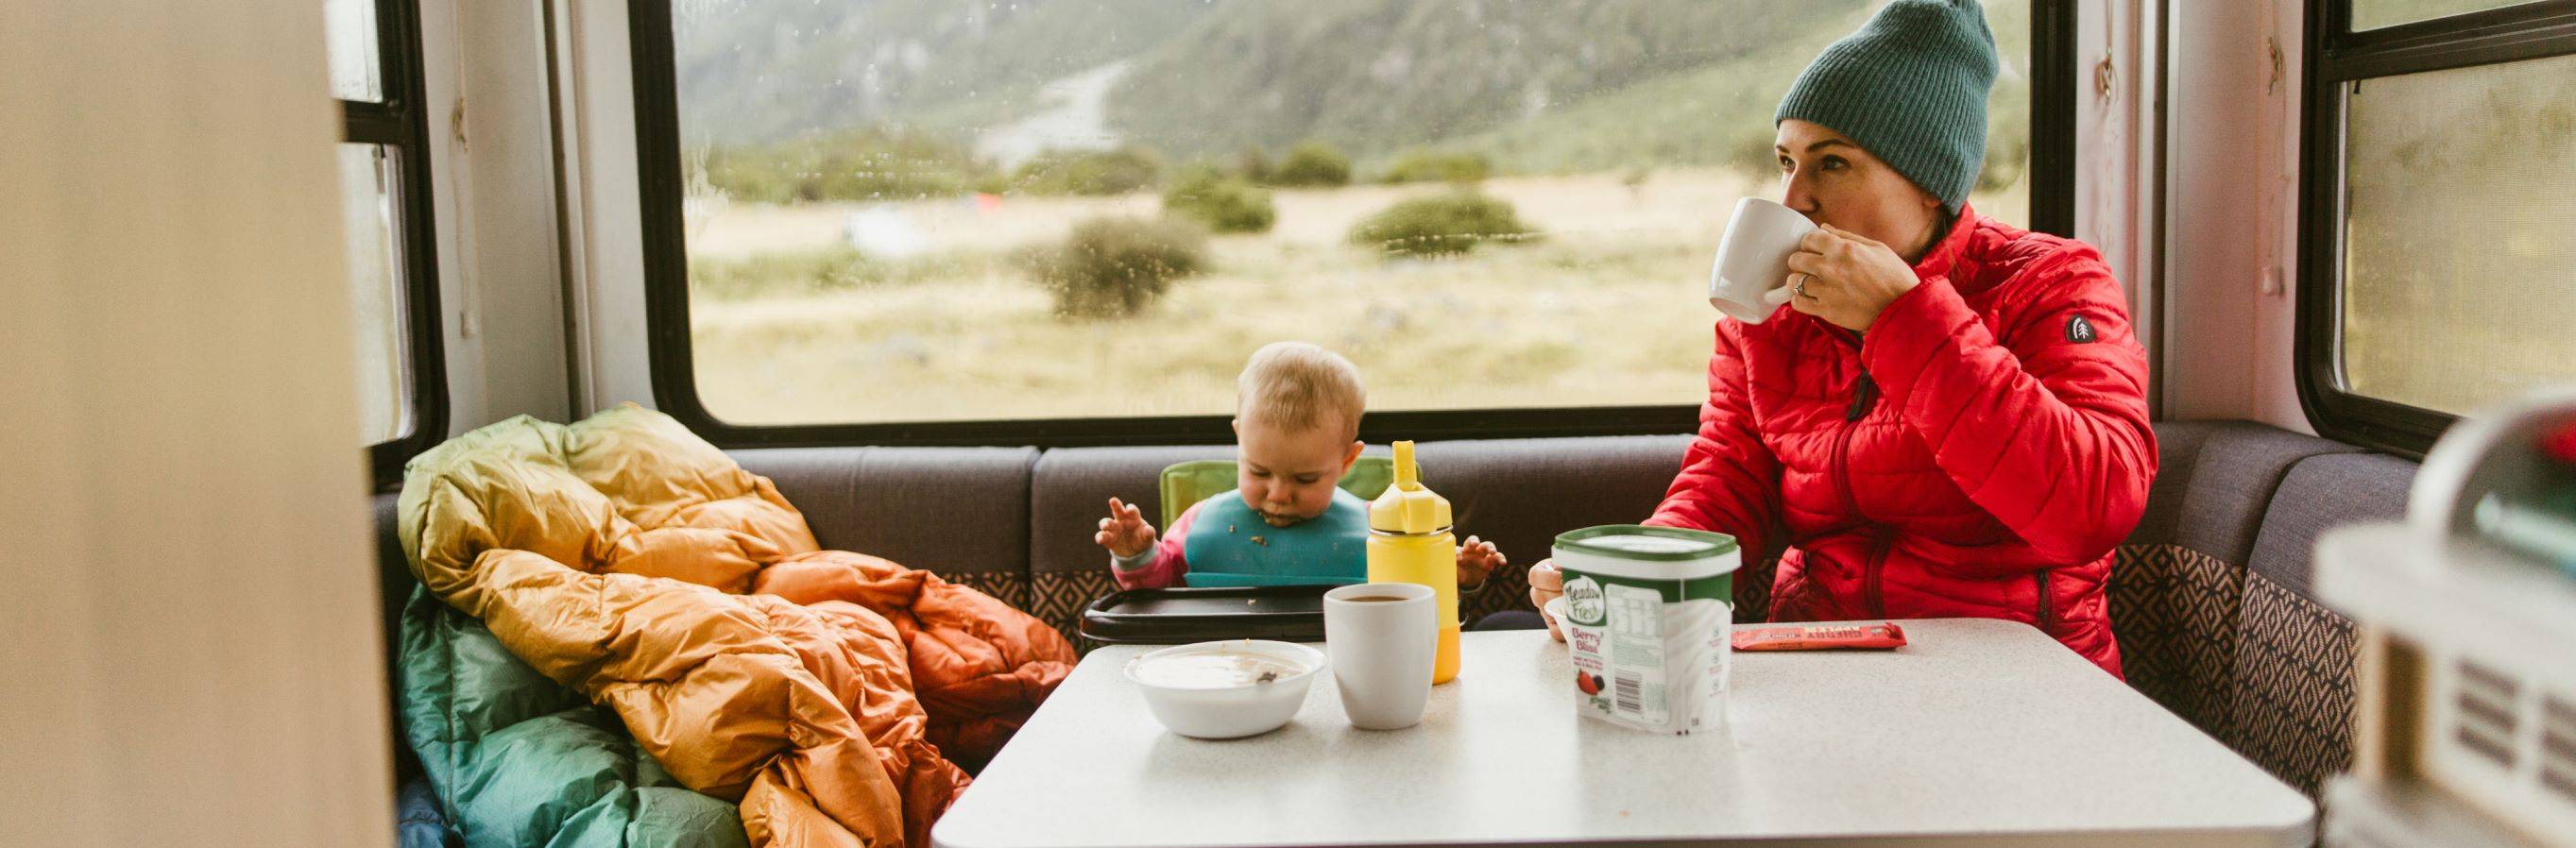 a mother and baby sitting at a table in a camper vehicle